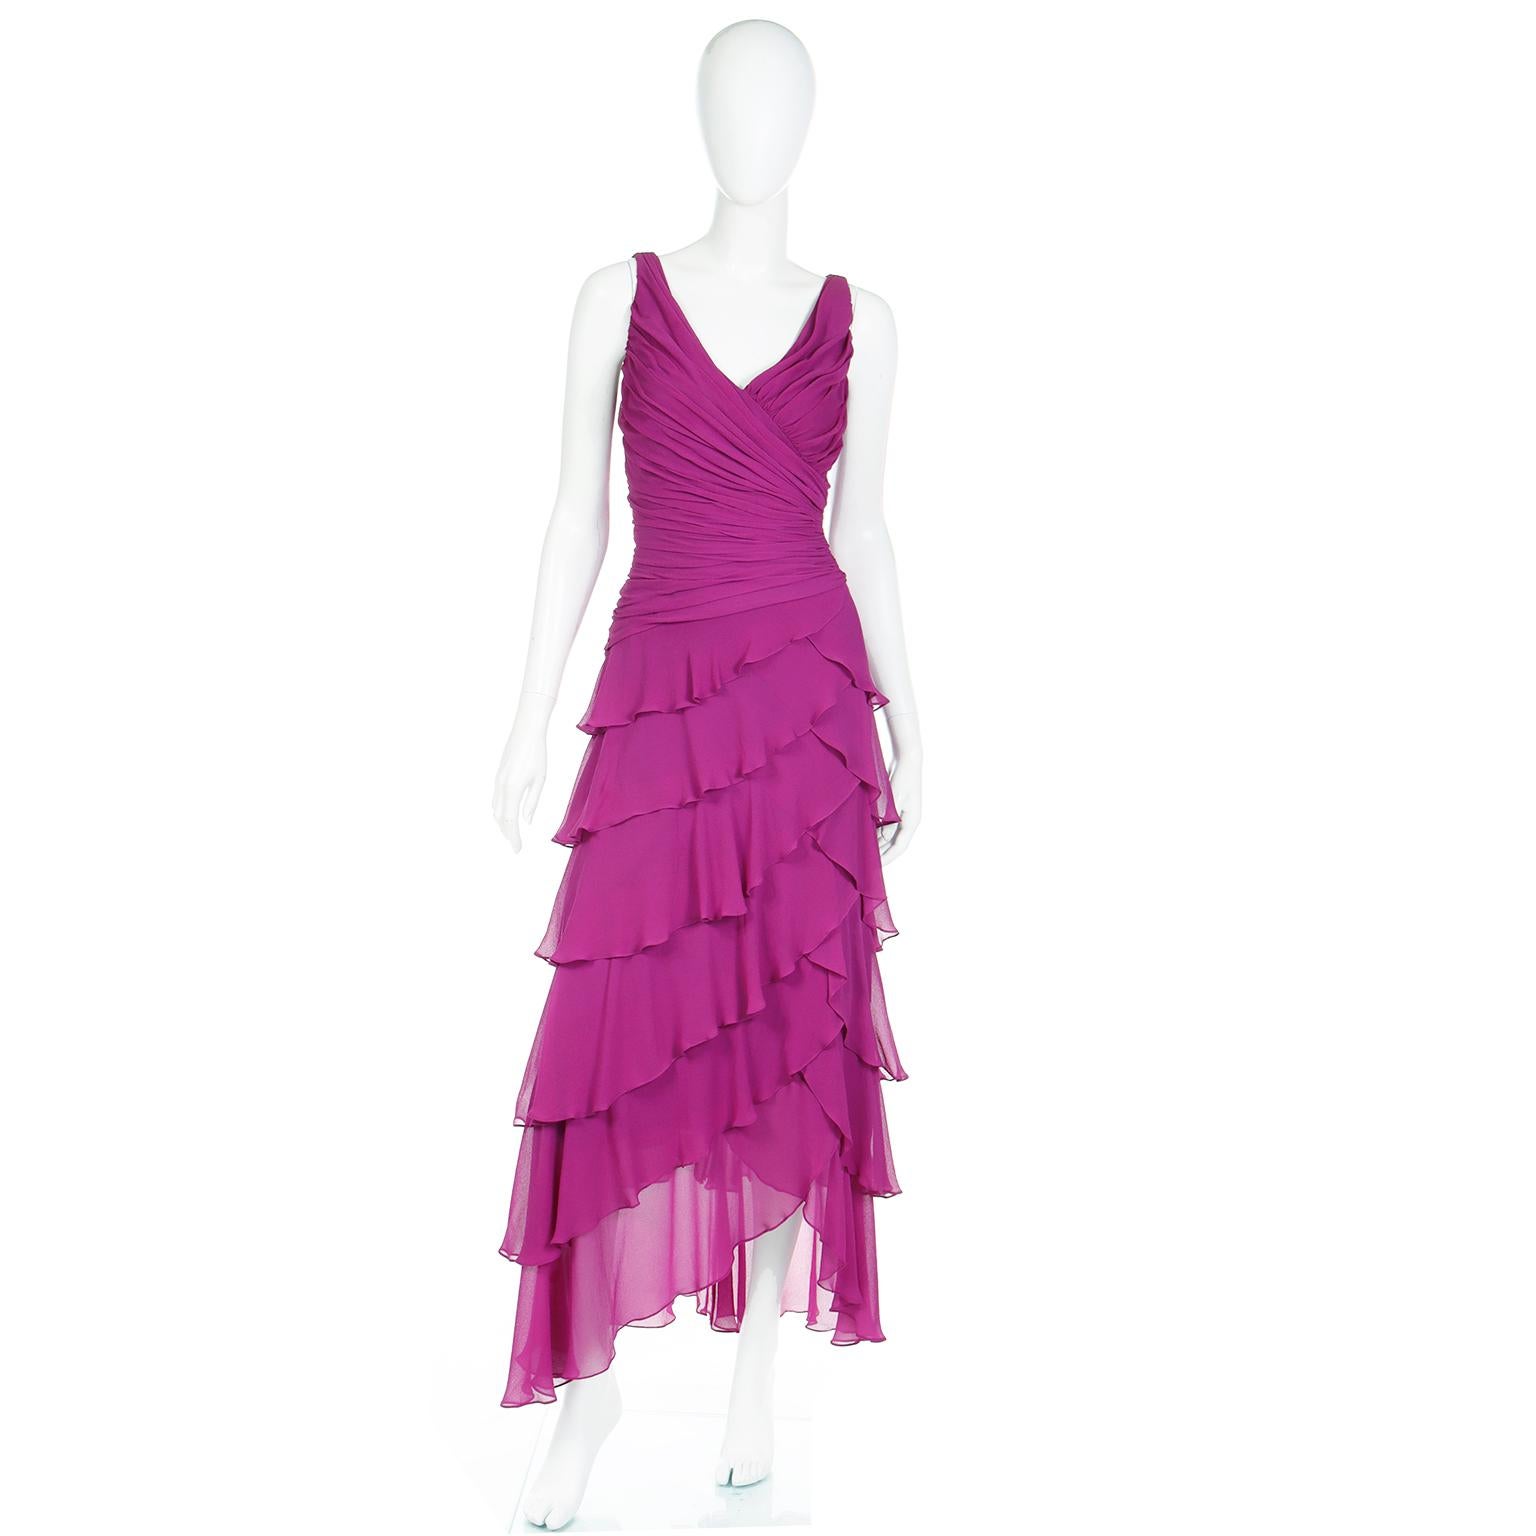 Tadashi Shoji made some gorgeous evening gowns and we particularly love the ones he designed in the 1980's and 1990's. We have sold so many of his dresses and the vintage pieces seem to be timeless. This ethereal vintage dress is in a pretty magenta